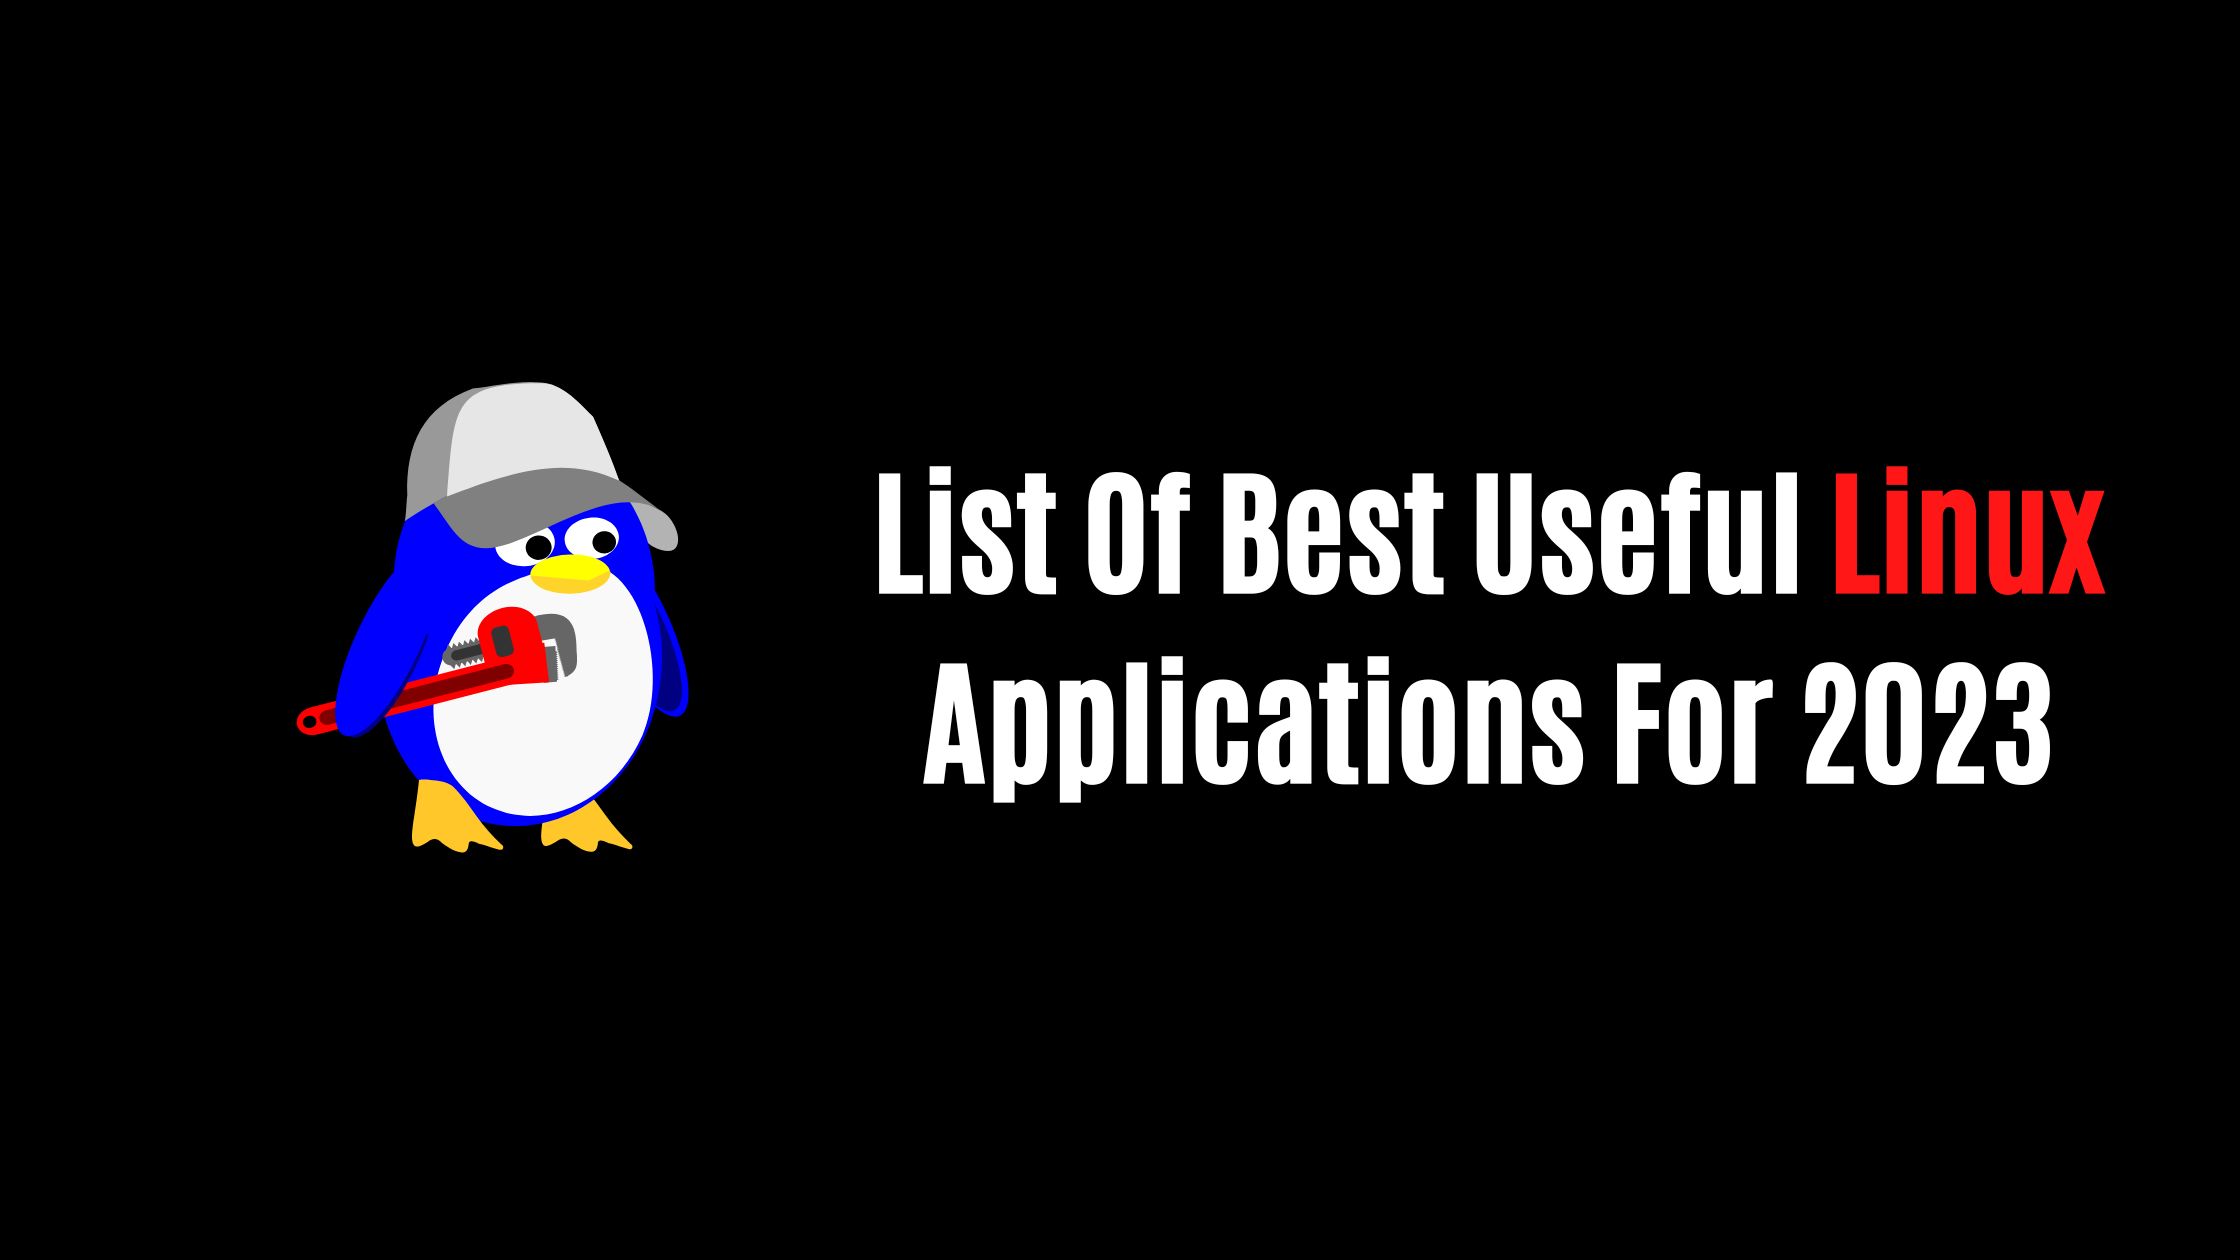 List Of Best Useful Linux Applications For 2023